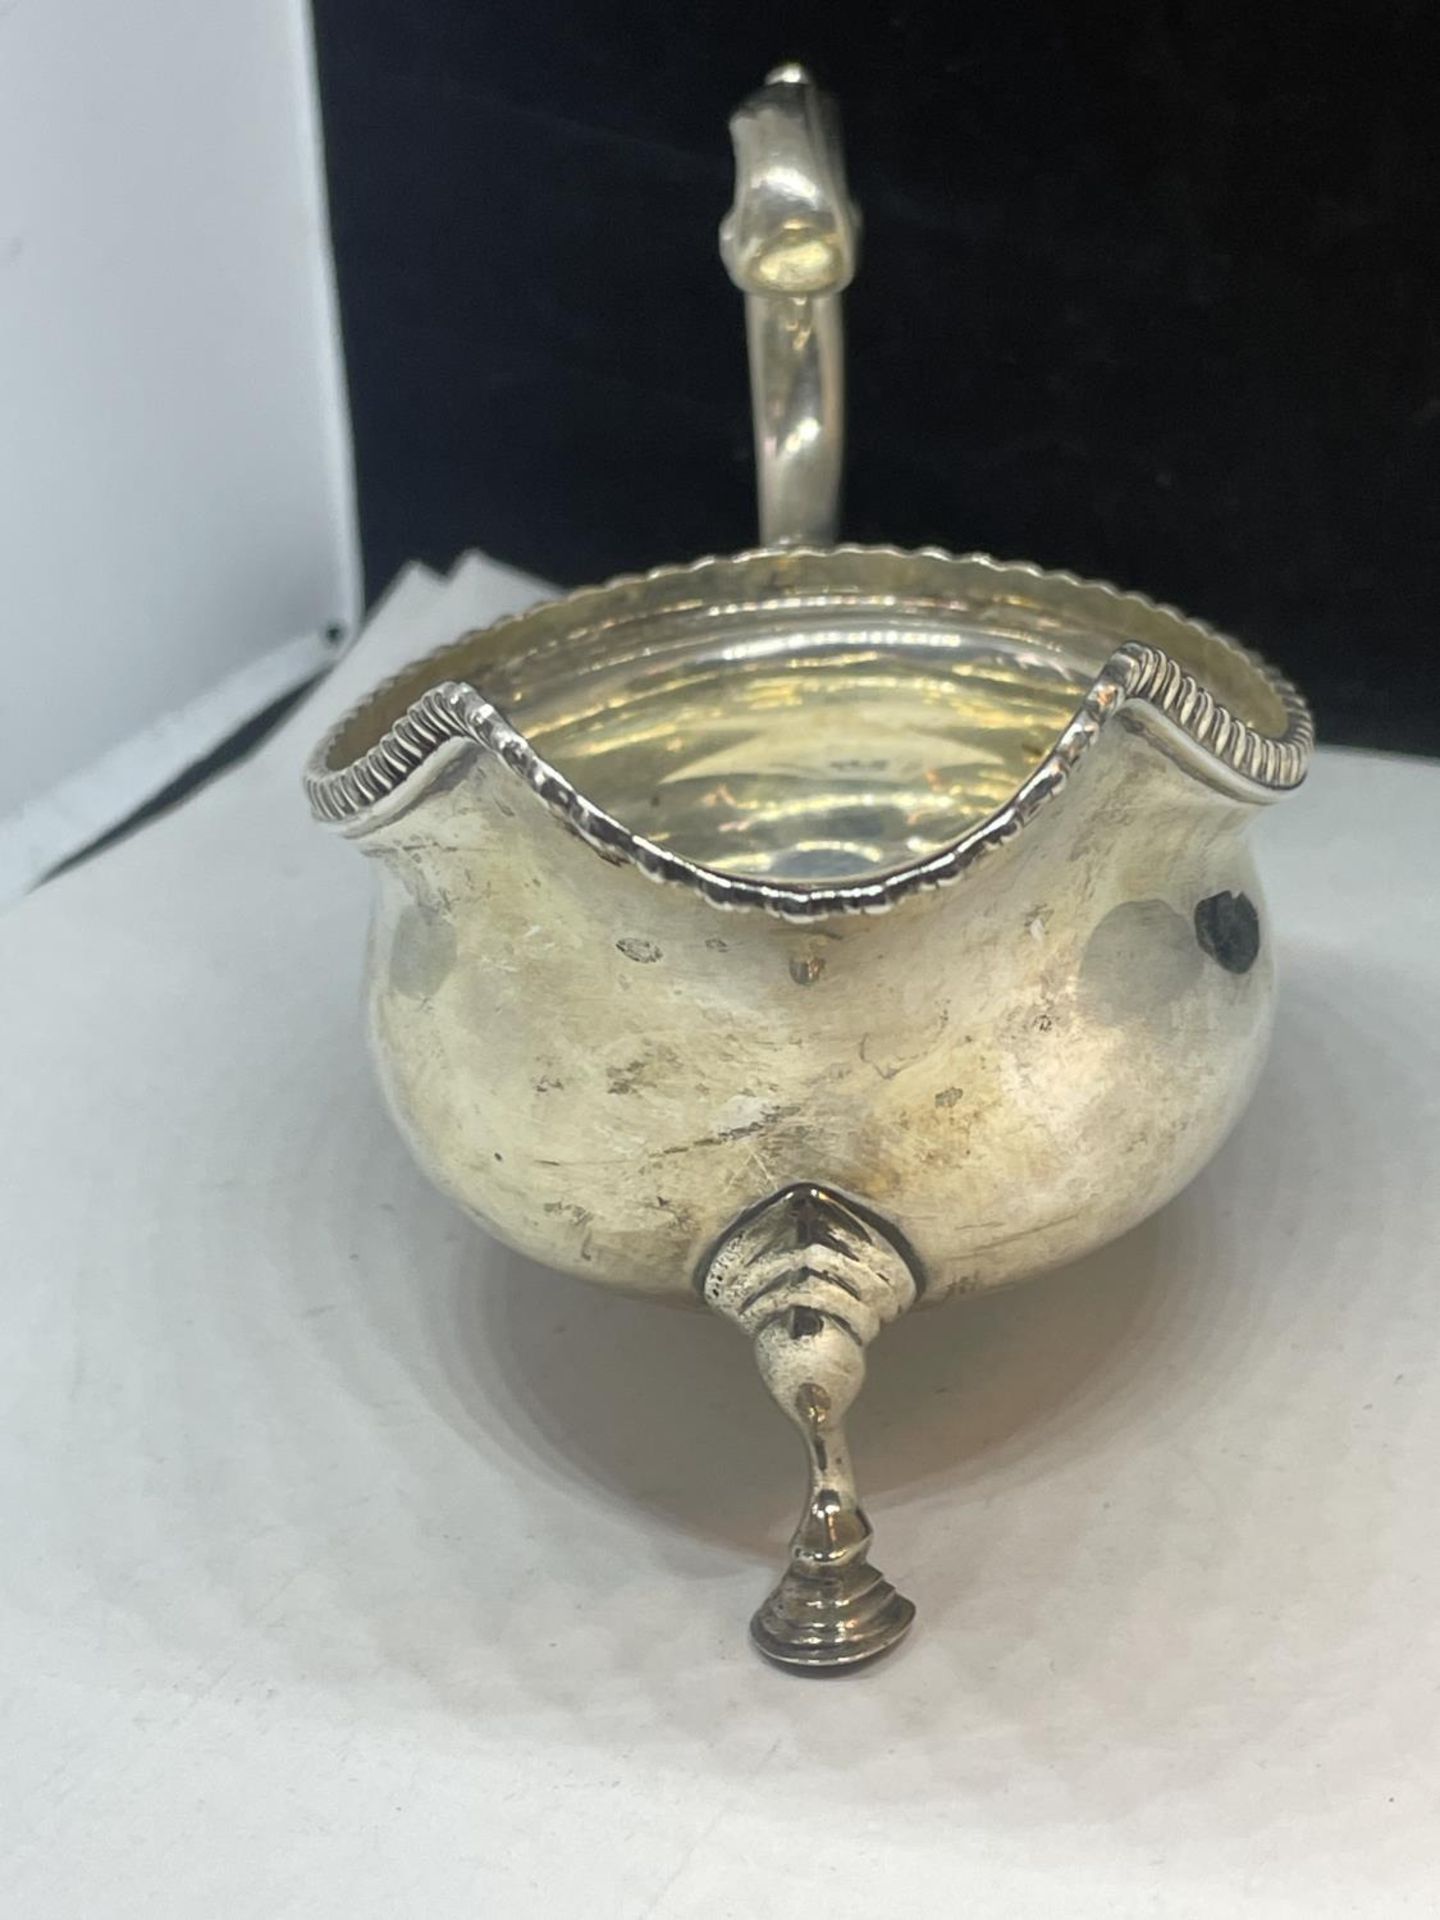 A BOODLE AND DUNTHORNE HALLMARKED CHESTER SILVER SAUCE BOAT GROSS WEIGHT 145.1 GRAMS - Image 2 of 4